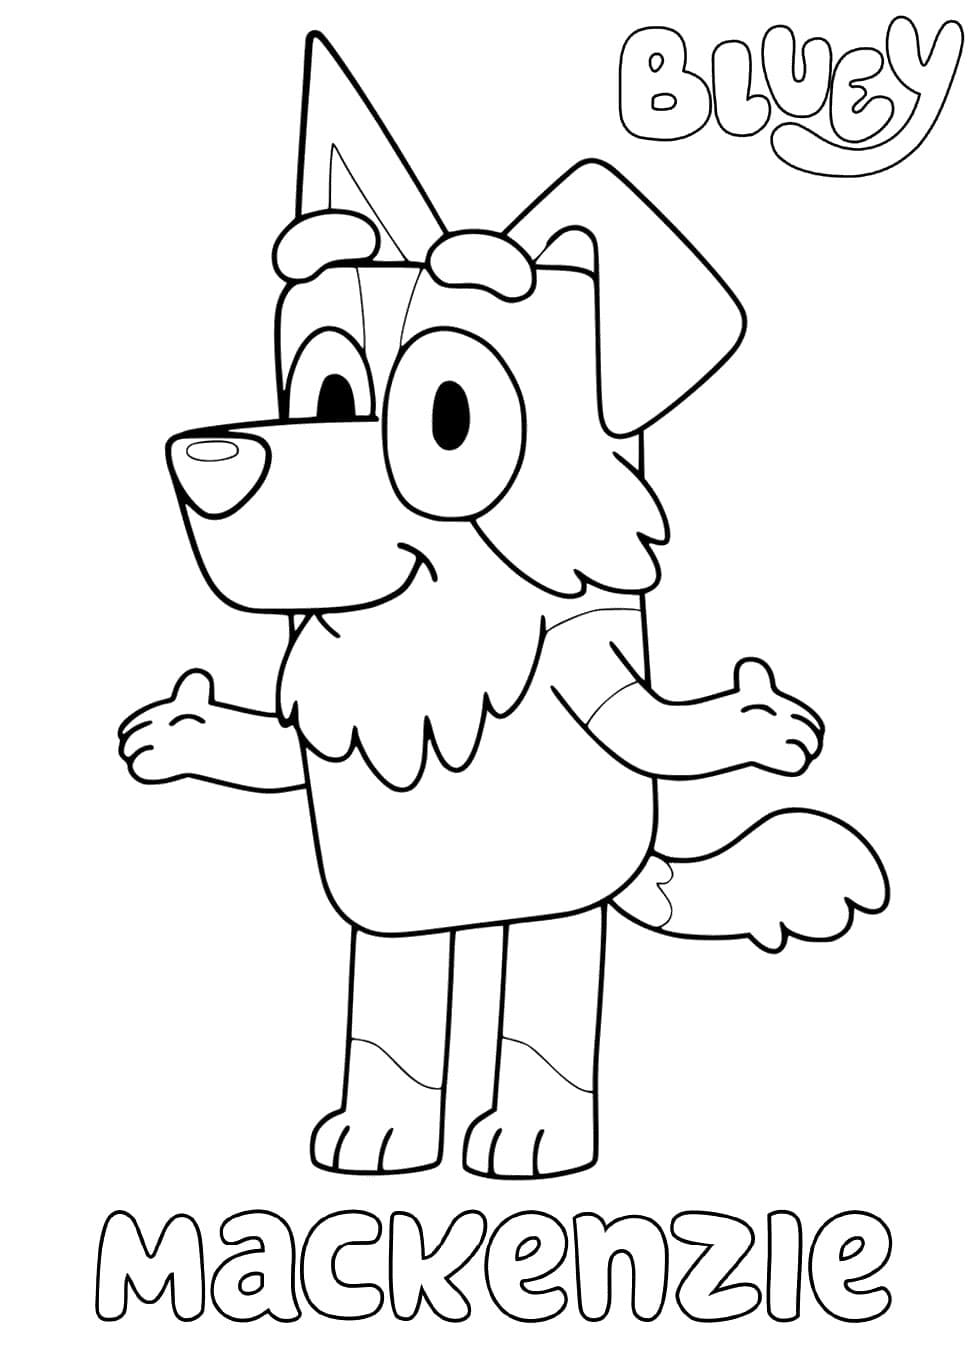 bingo-heeler-from-bluey-coloring-page-free-printable-coloring-pages